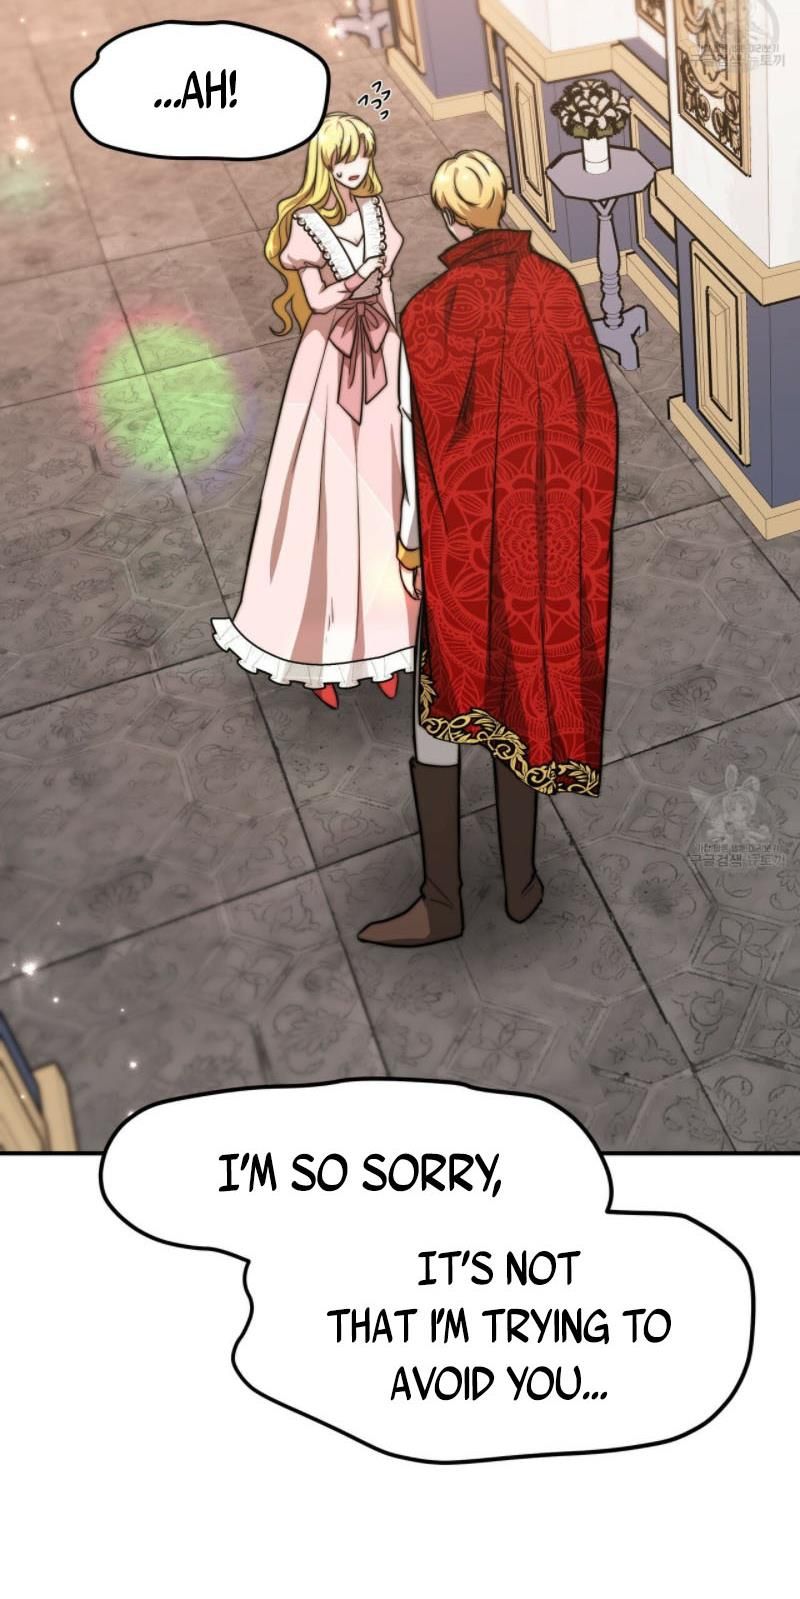 The Forgotten Princess Wants To Live In Peace chapter 11 - Page 57